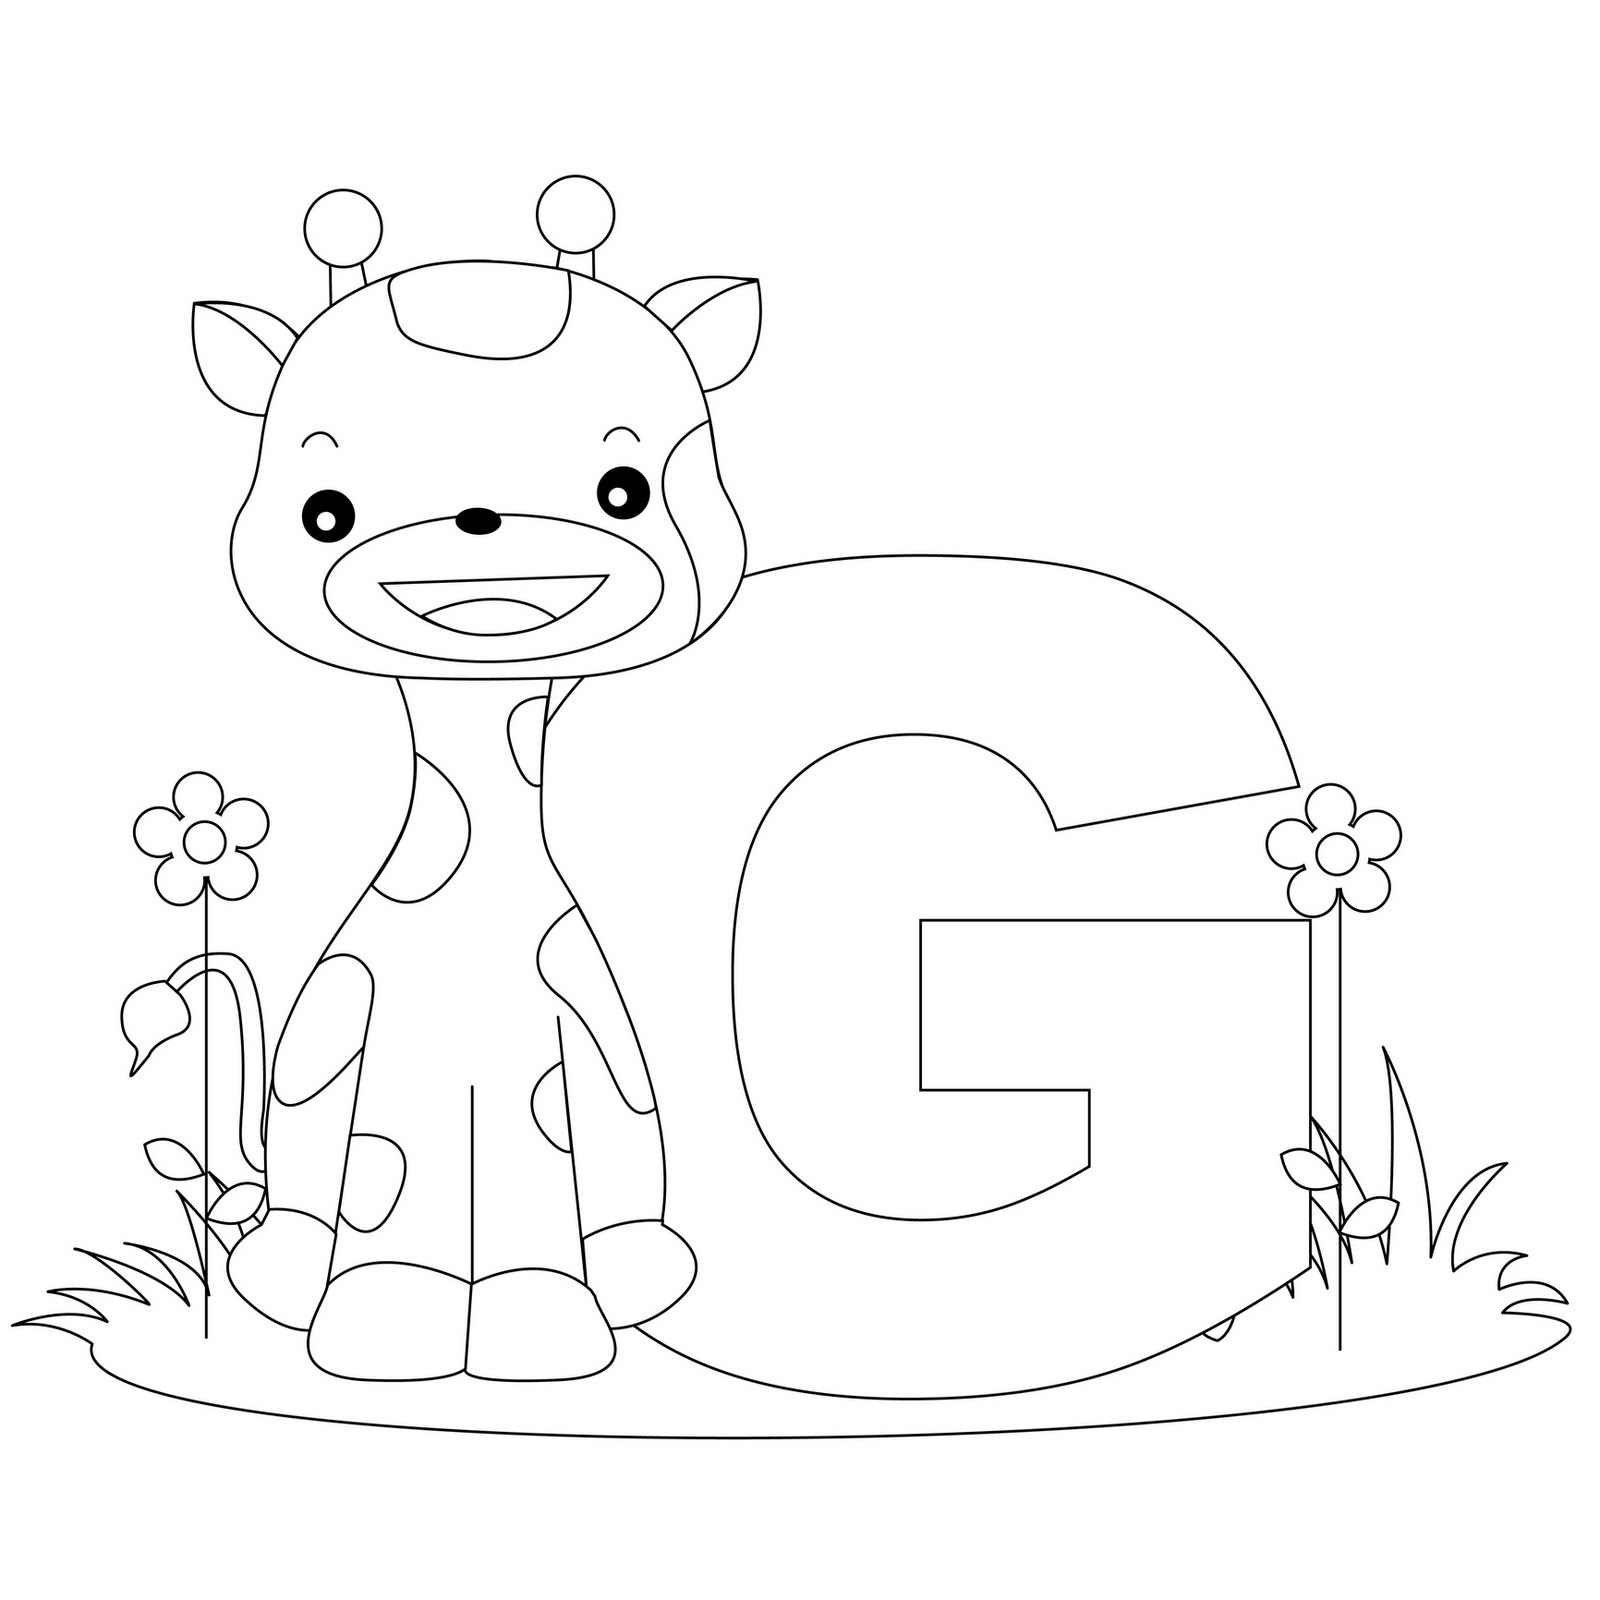 coloring-pages-letter-g